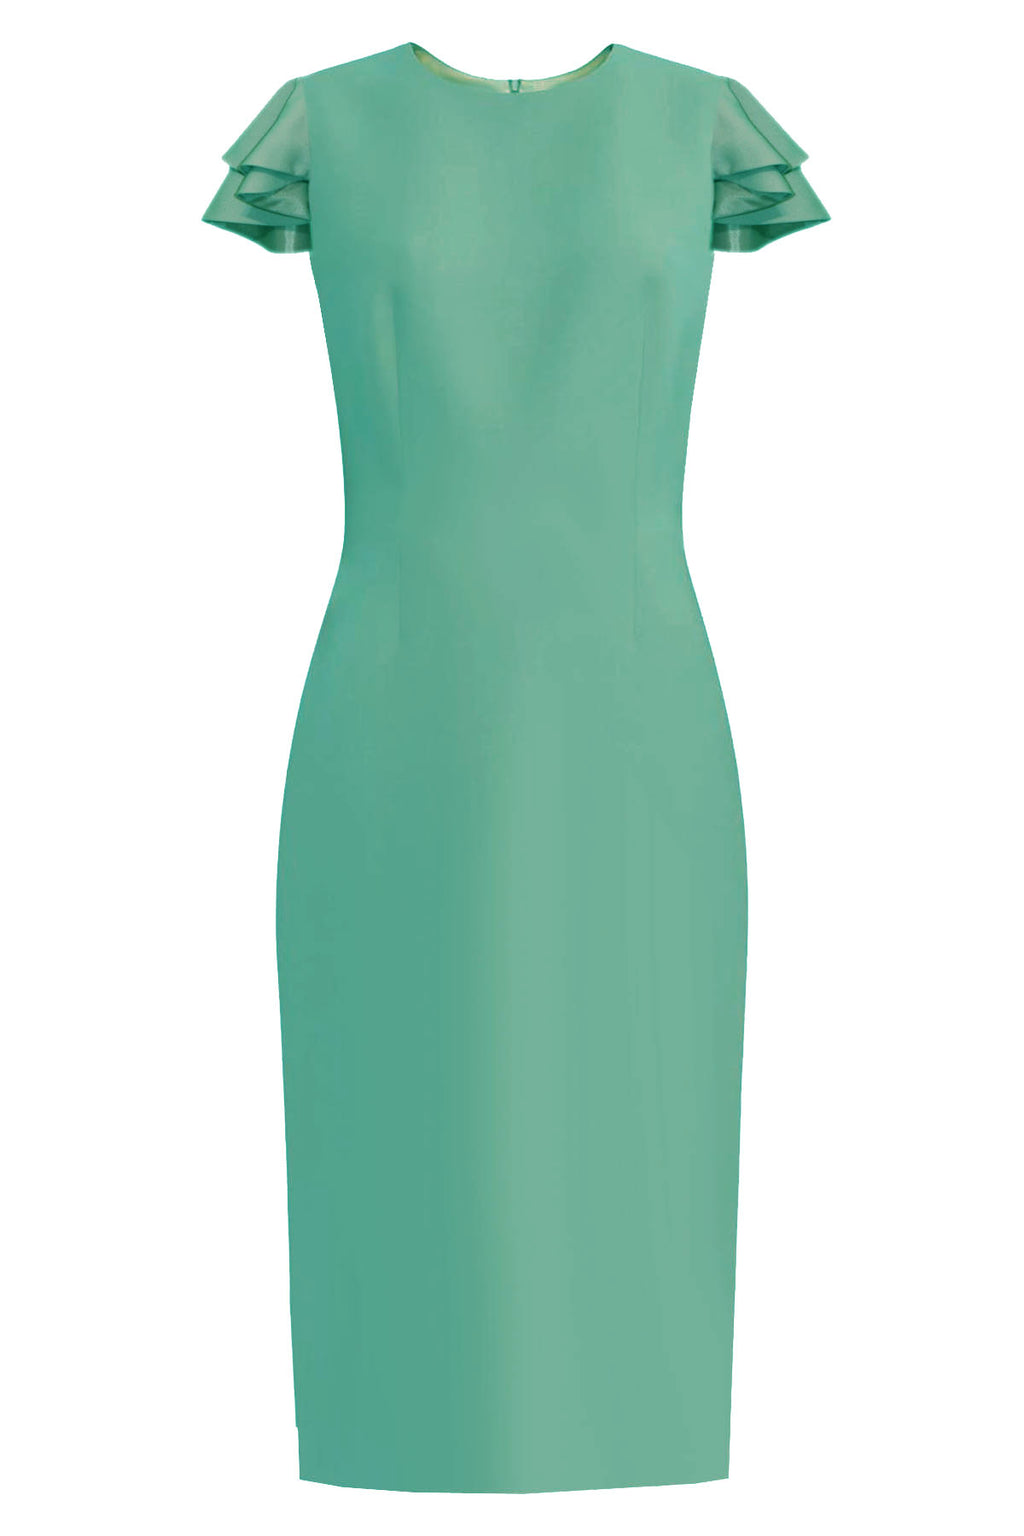 mint green sheath dress with sleeves